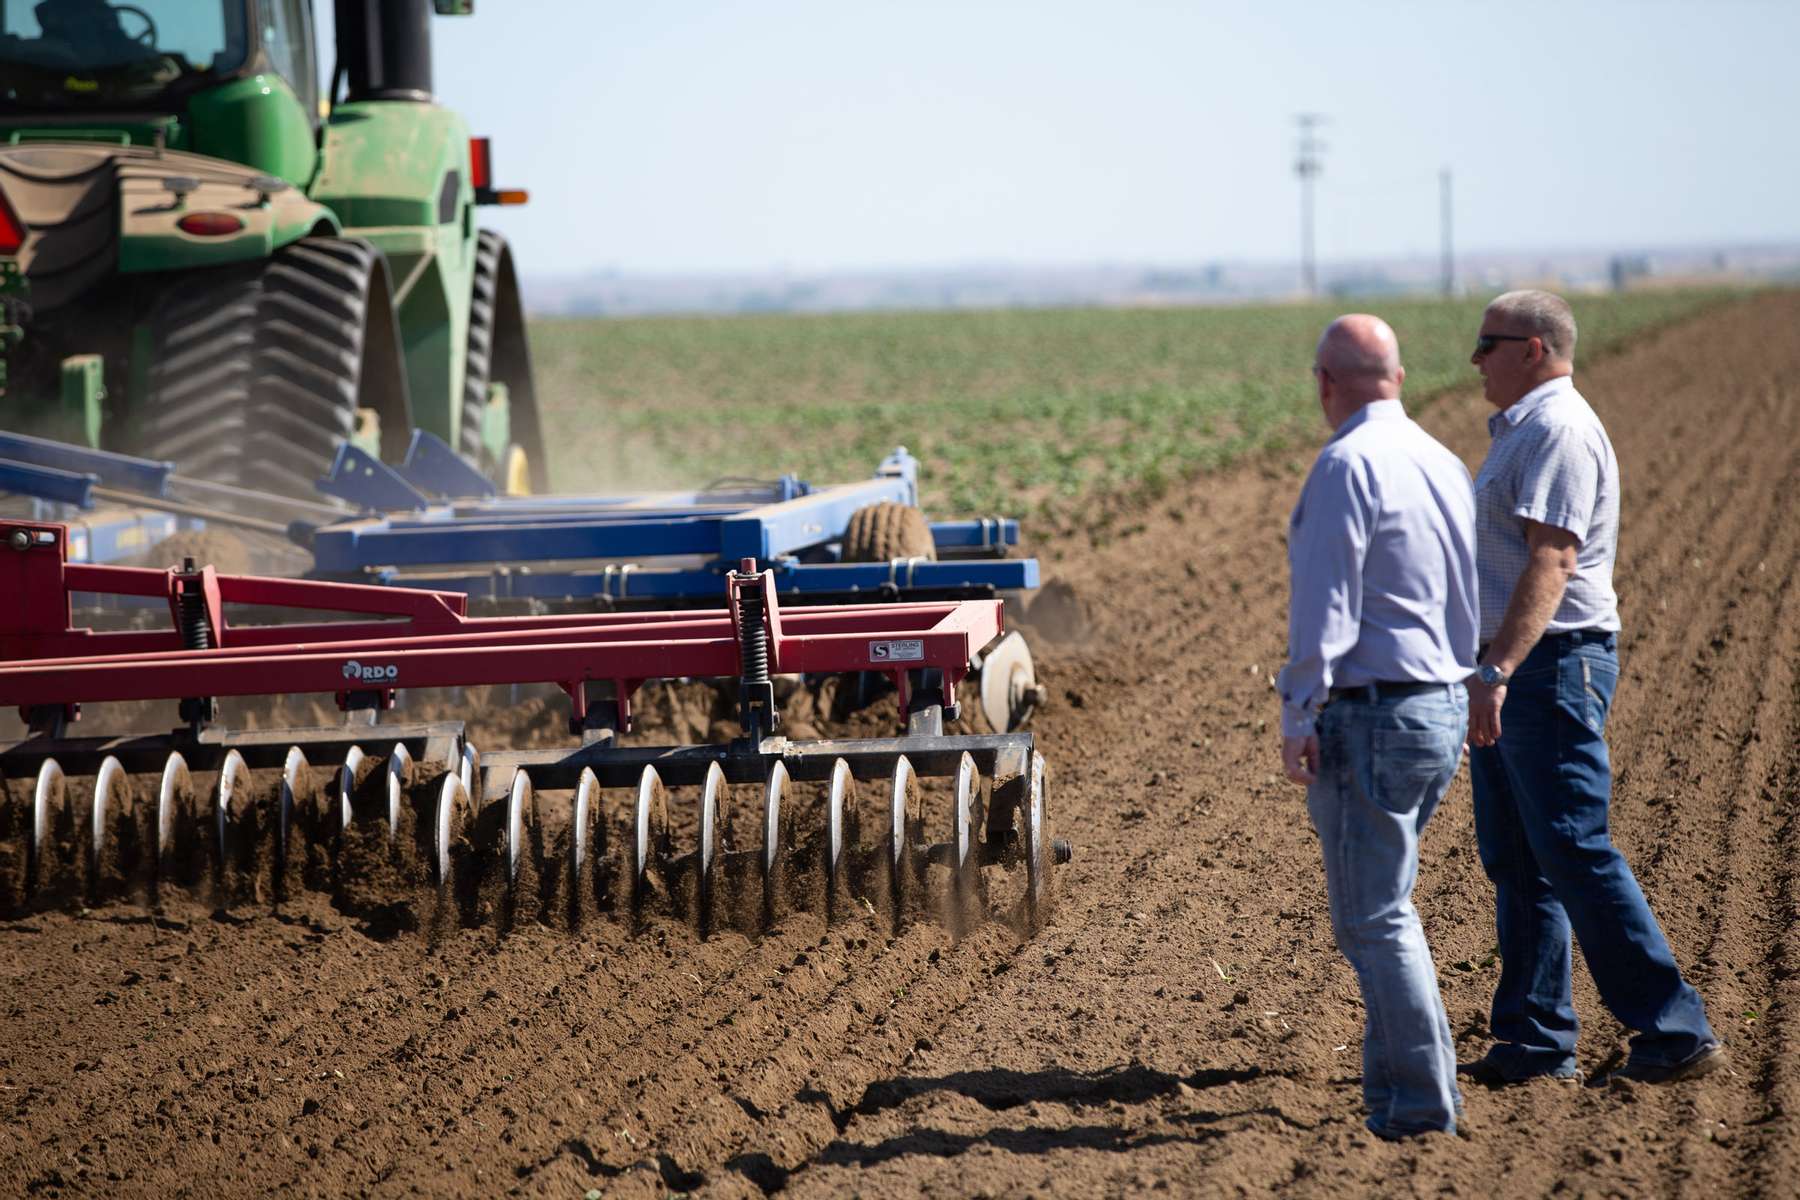 Dale Lathim, Executive Director of the Potato Grower’s of Washington and President of the Potato Marketing Association of North America (left) and grower Mike Pink of Pink Farms watch an agricultural machine destroy his potato plants in his field in Mesa, Washington on May 1, 2020. Pink had half his crop destroyed in order minimize his losses and plans to grow sweet corn there instead. A billion pounds of potatoes sits in excess in Washington state, the second largest potato producer in the country. About 70 percent of its crop usually goes to overseas, to Pacific Rim countries primarily, in the form of french fries, but with so many restaurants/food service closed in U.S. and internationally, they have way more potatoes than they can sell. Last year they didn’t have enough to meet demand; now growers are facing the prospect of losing it all. (photo by Karen Ducey)